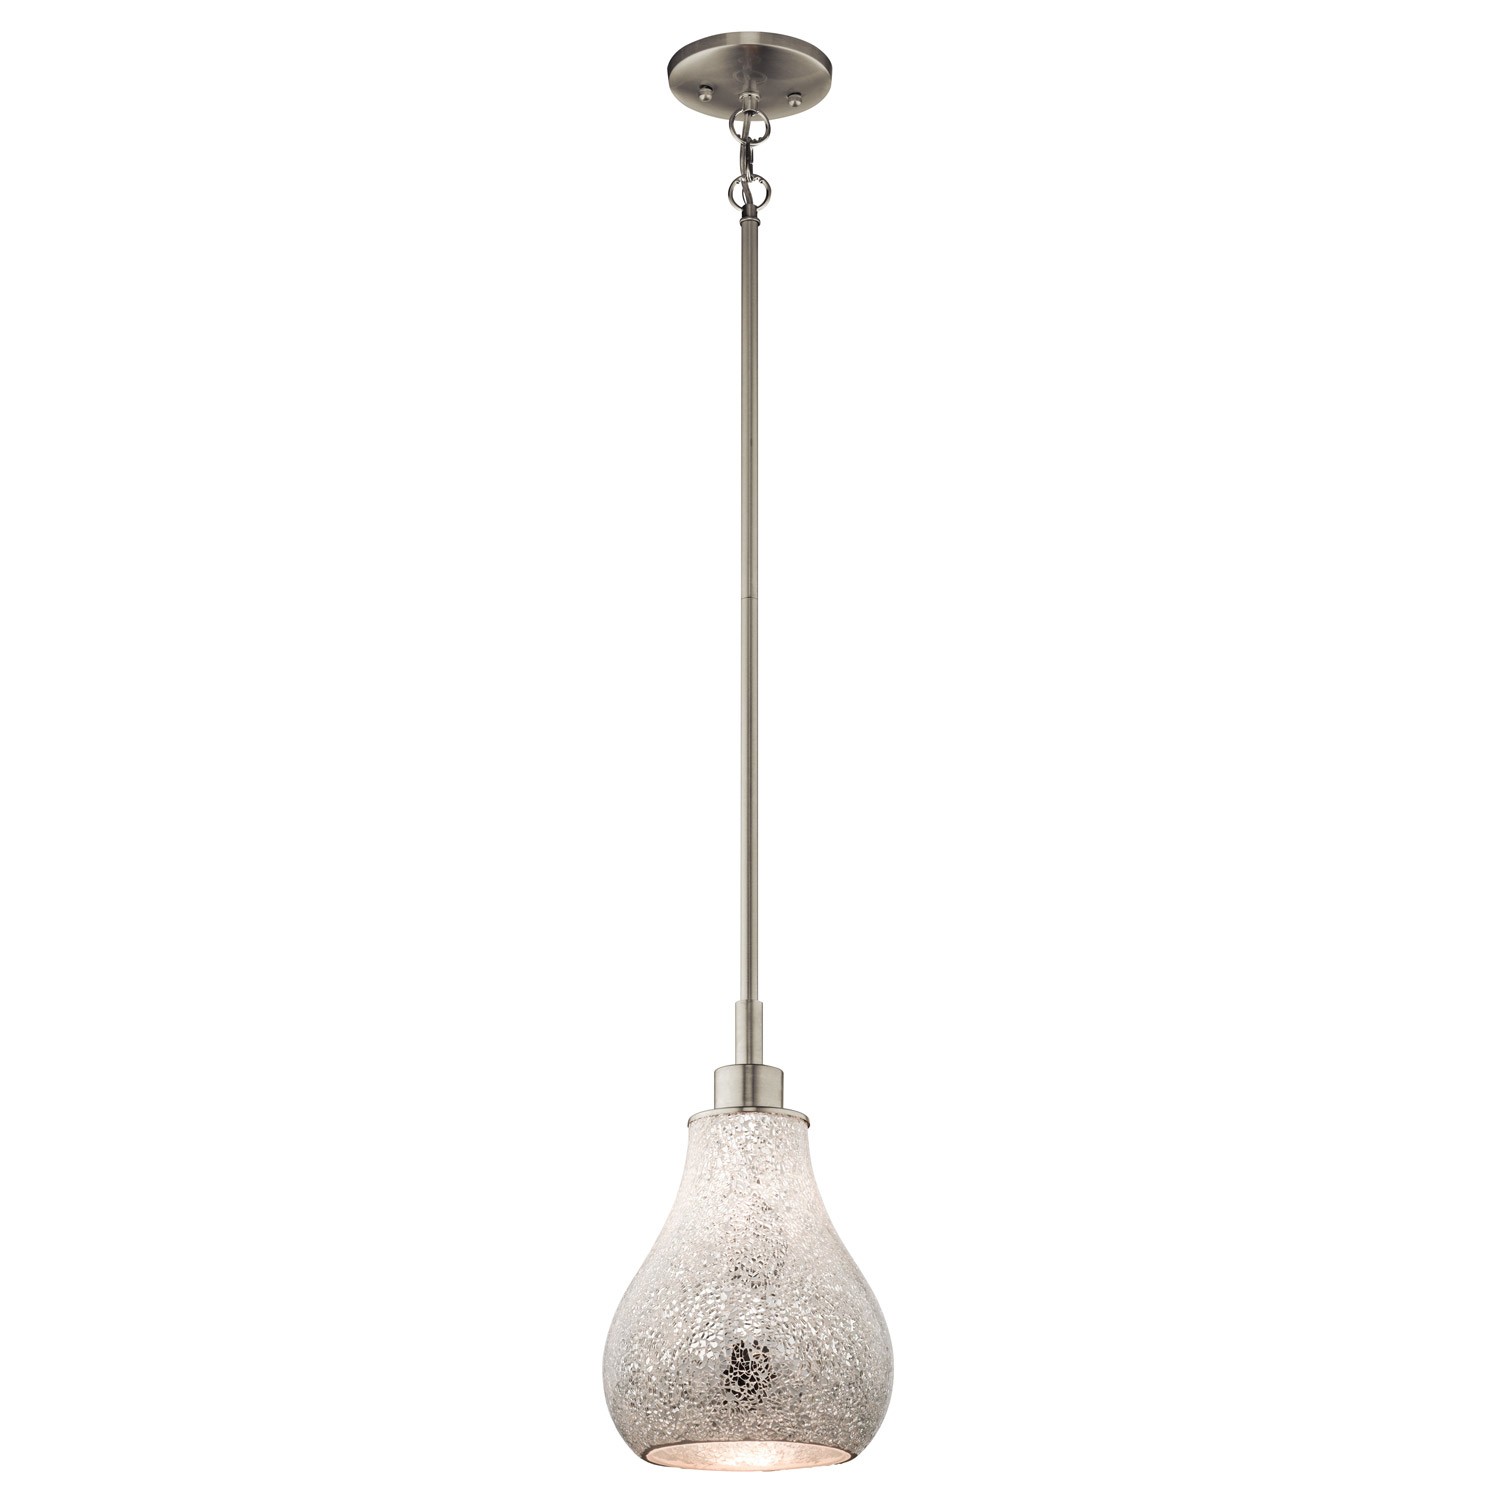 Kichler Lighting 65407 Crystal Ball 1LT Mini-Pendant, Brushed Nickel Finish with Clear Art Glass Shade